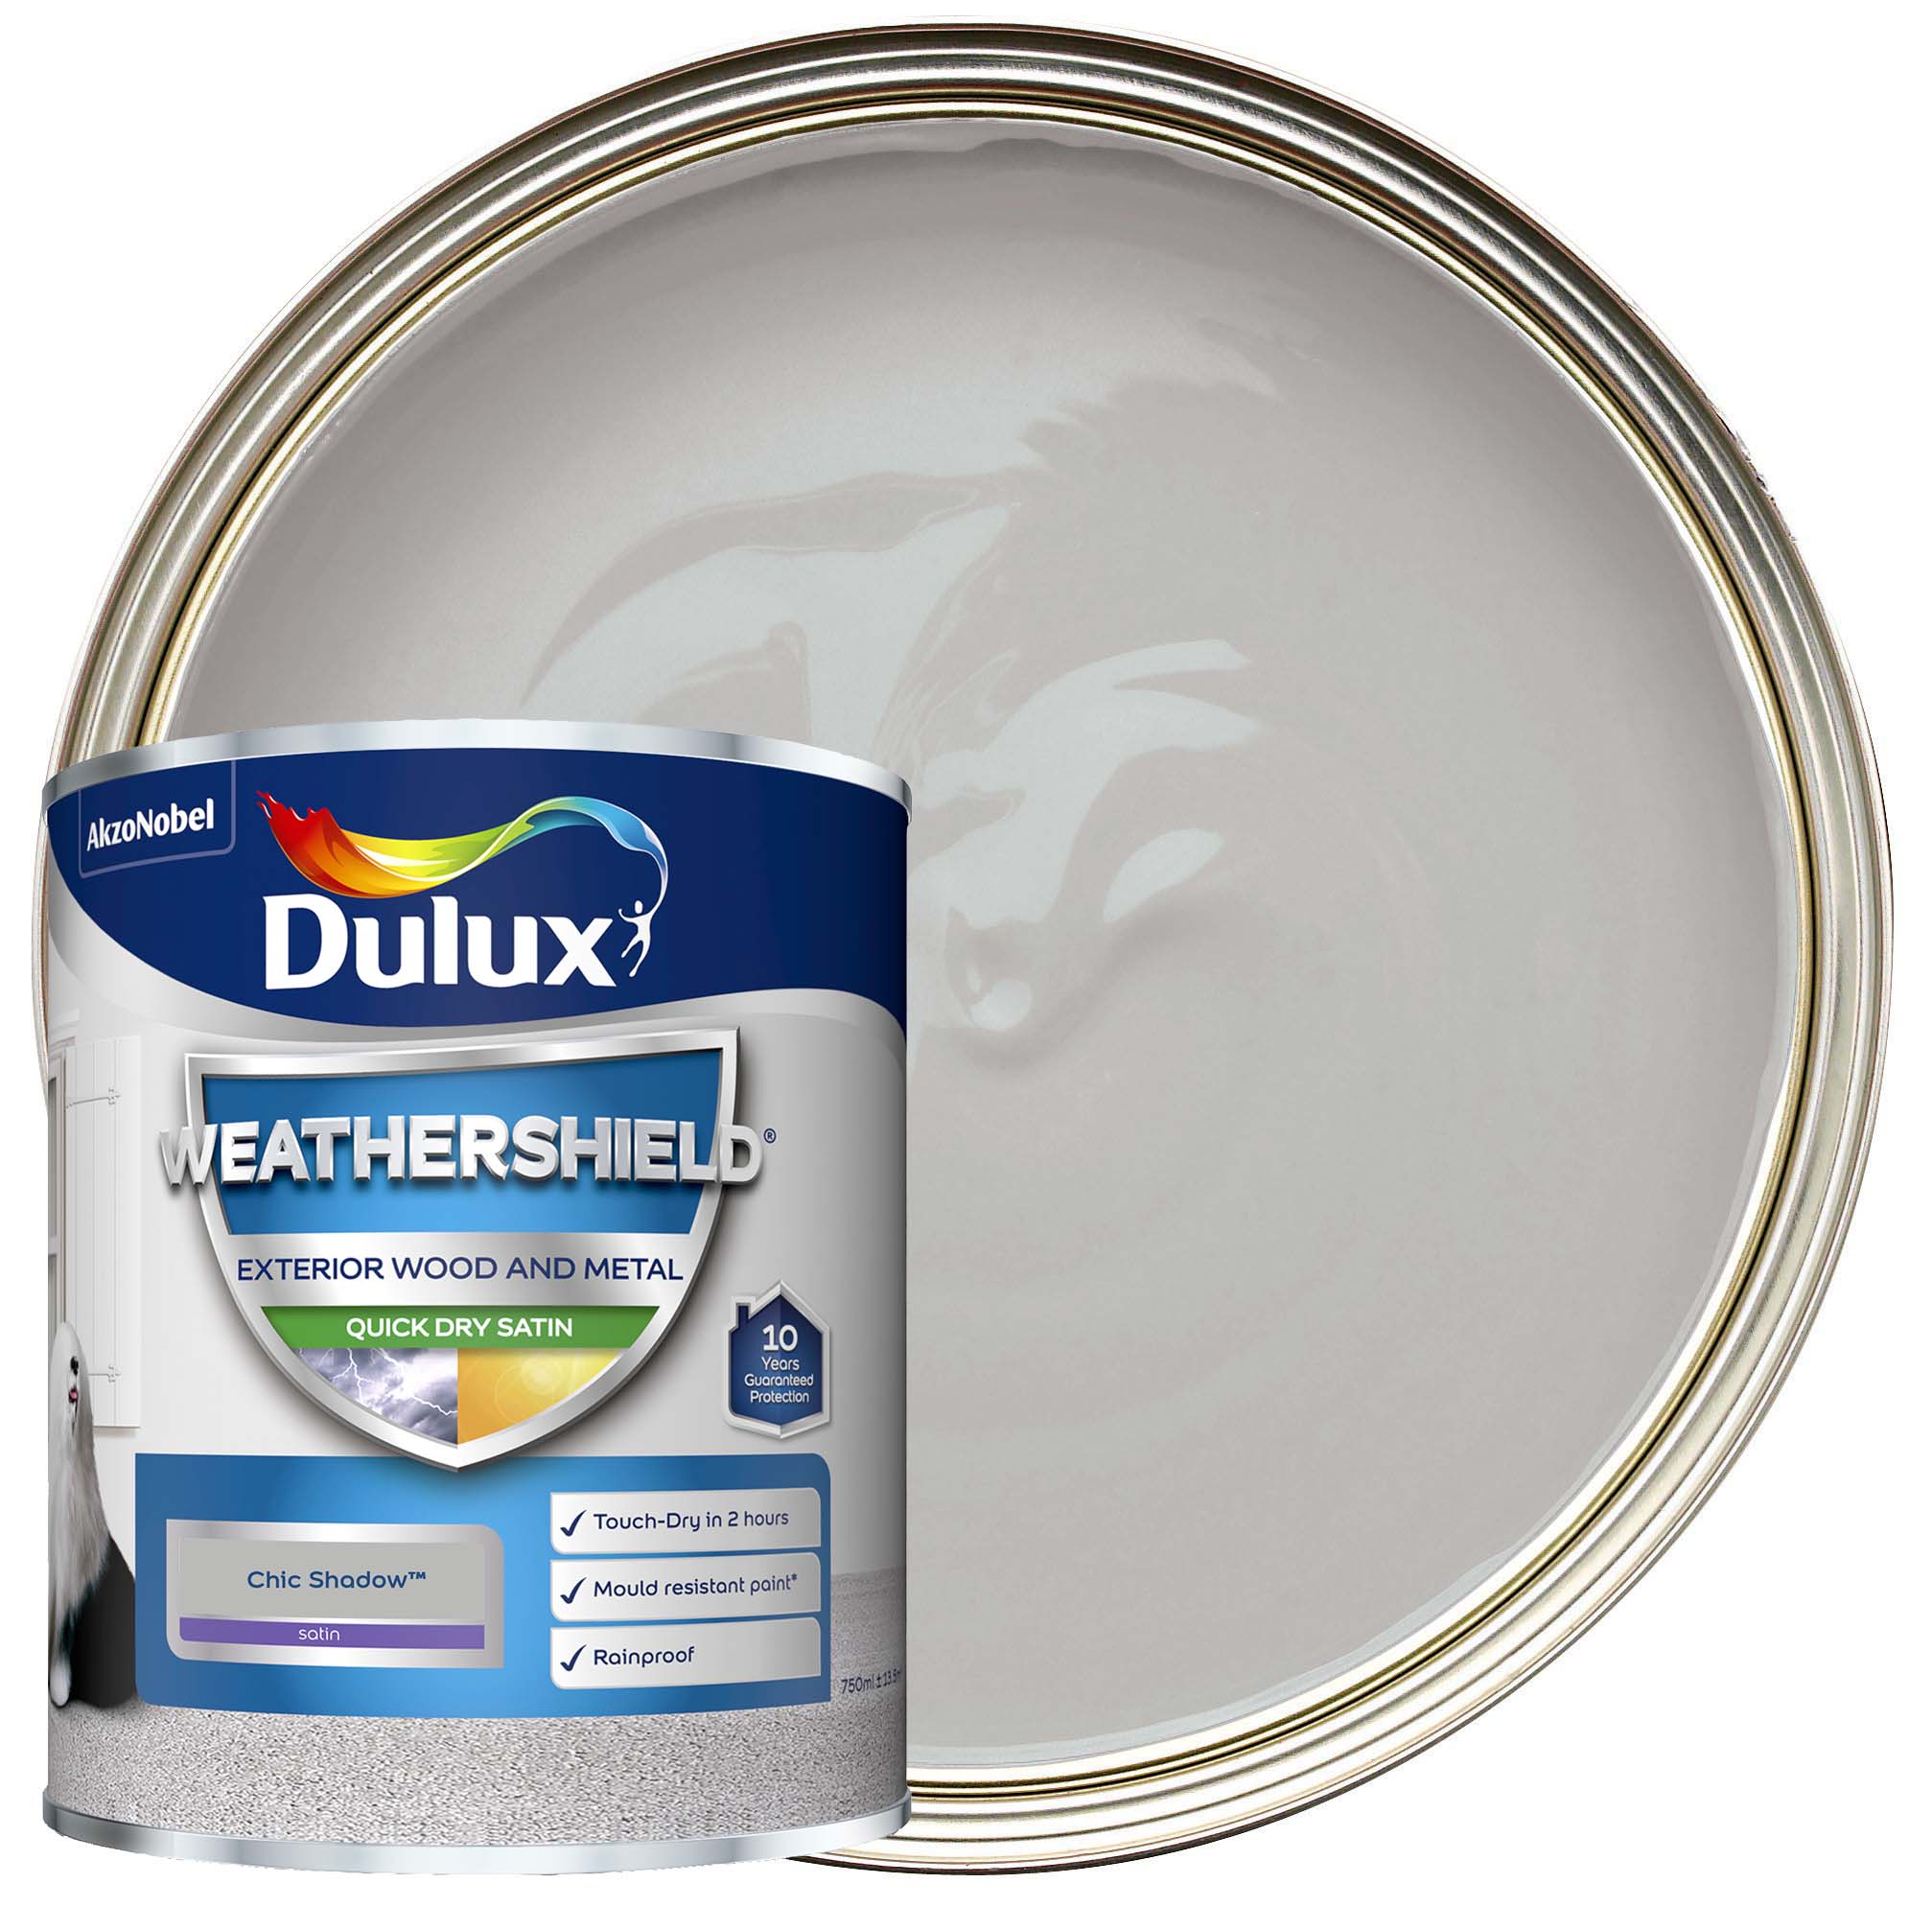 Image of Dulux Weathershield Quick Dry Satin Paint - Chic Shadow - 750ml